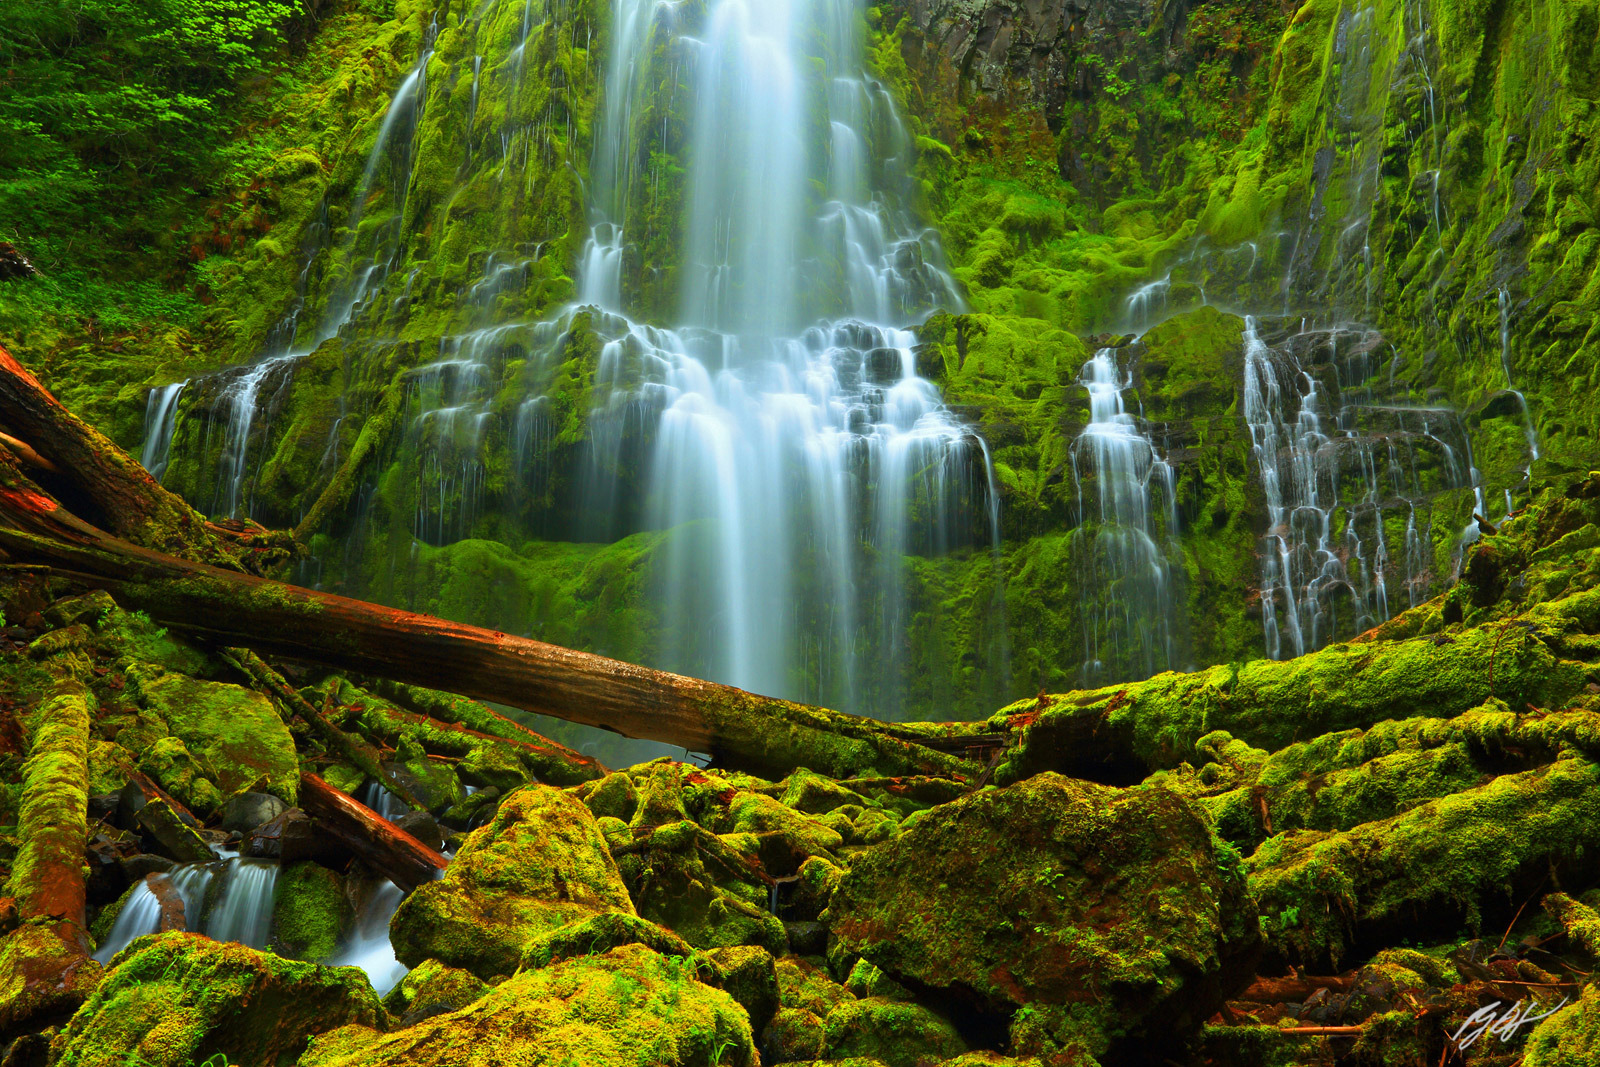 Proxy Falls in the Willamette National Forest in Oregon